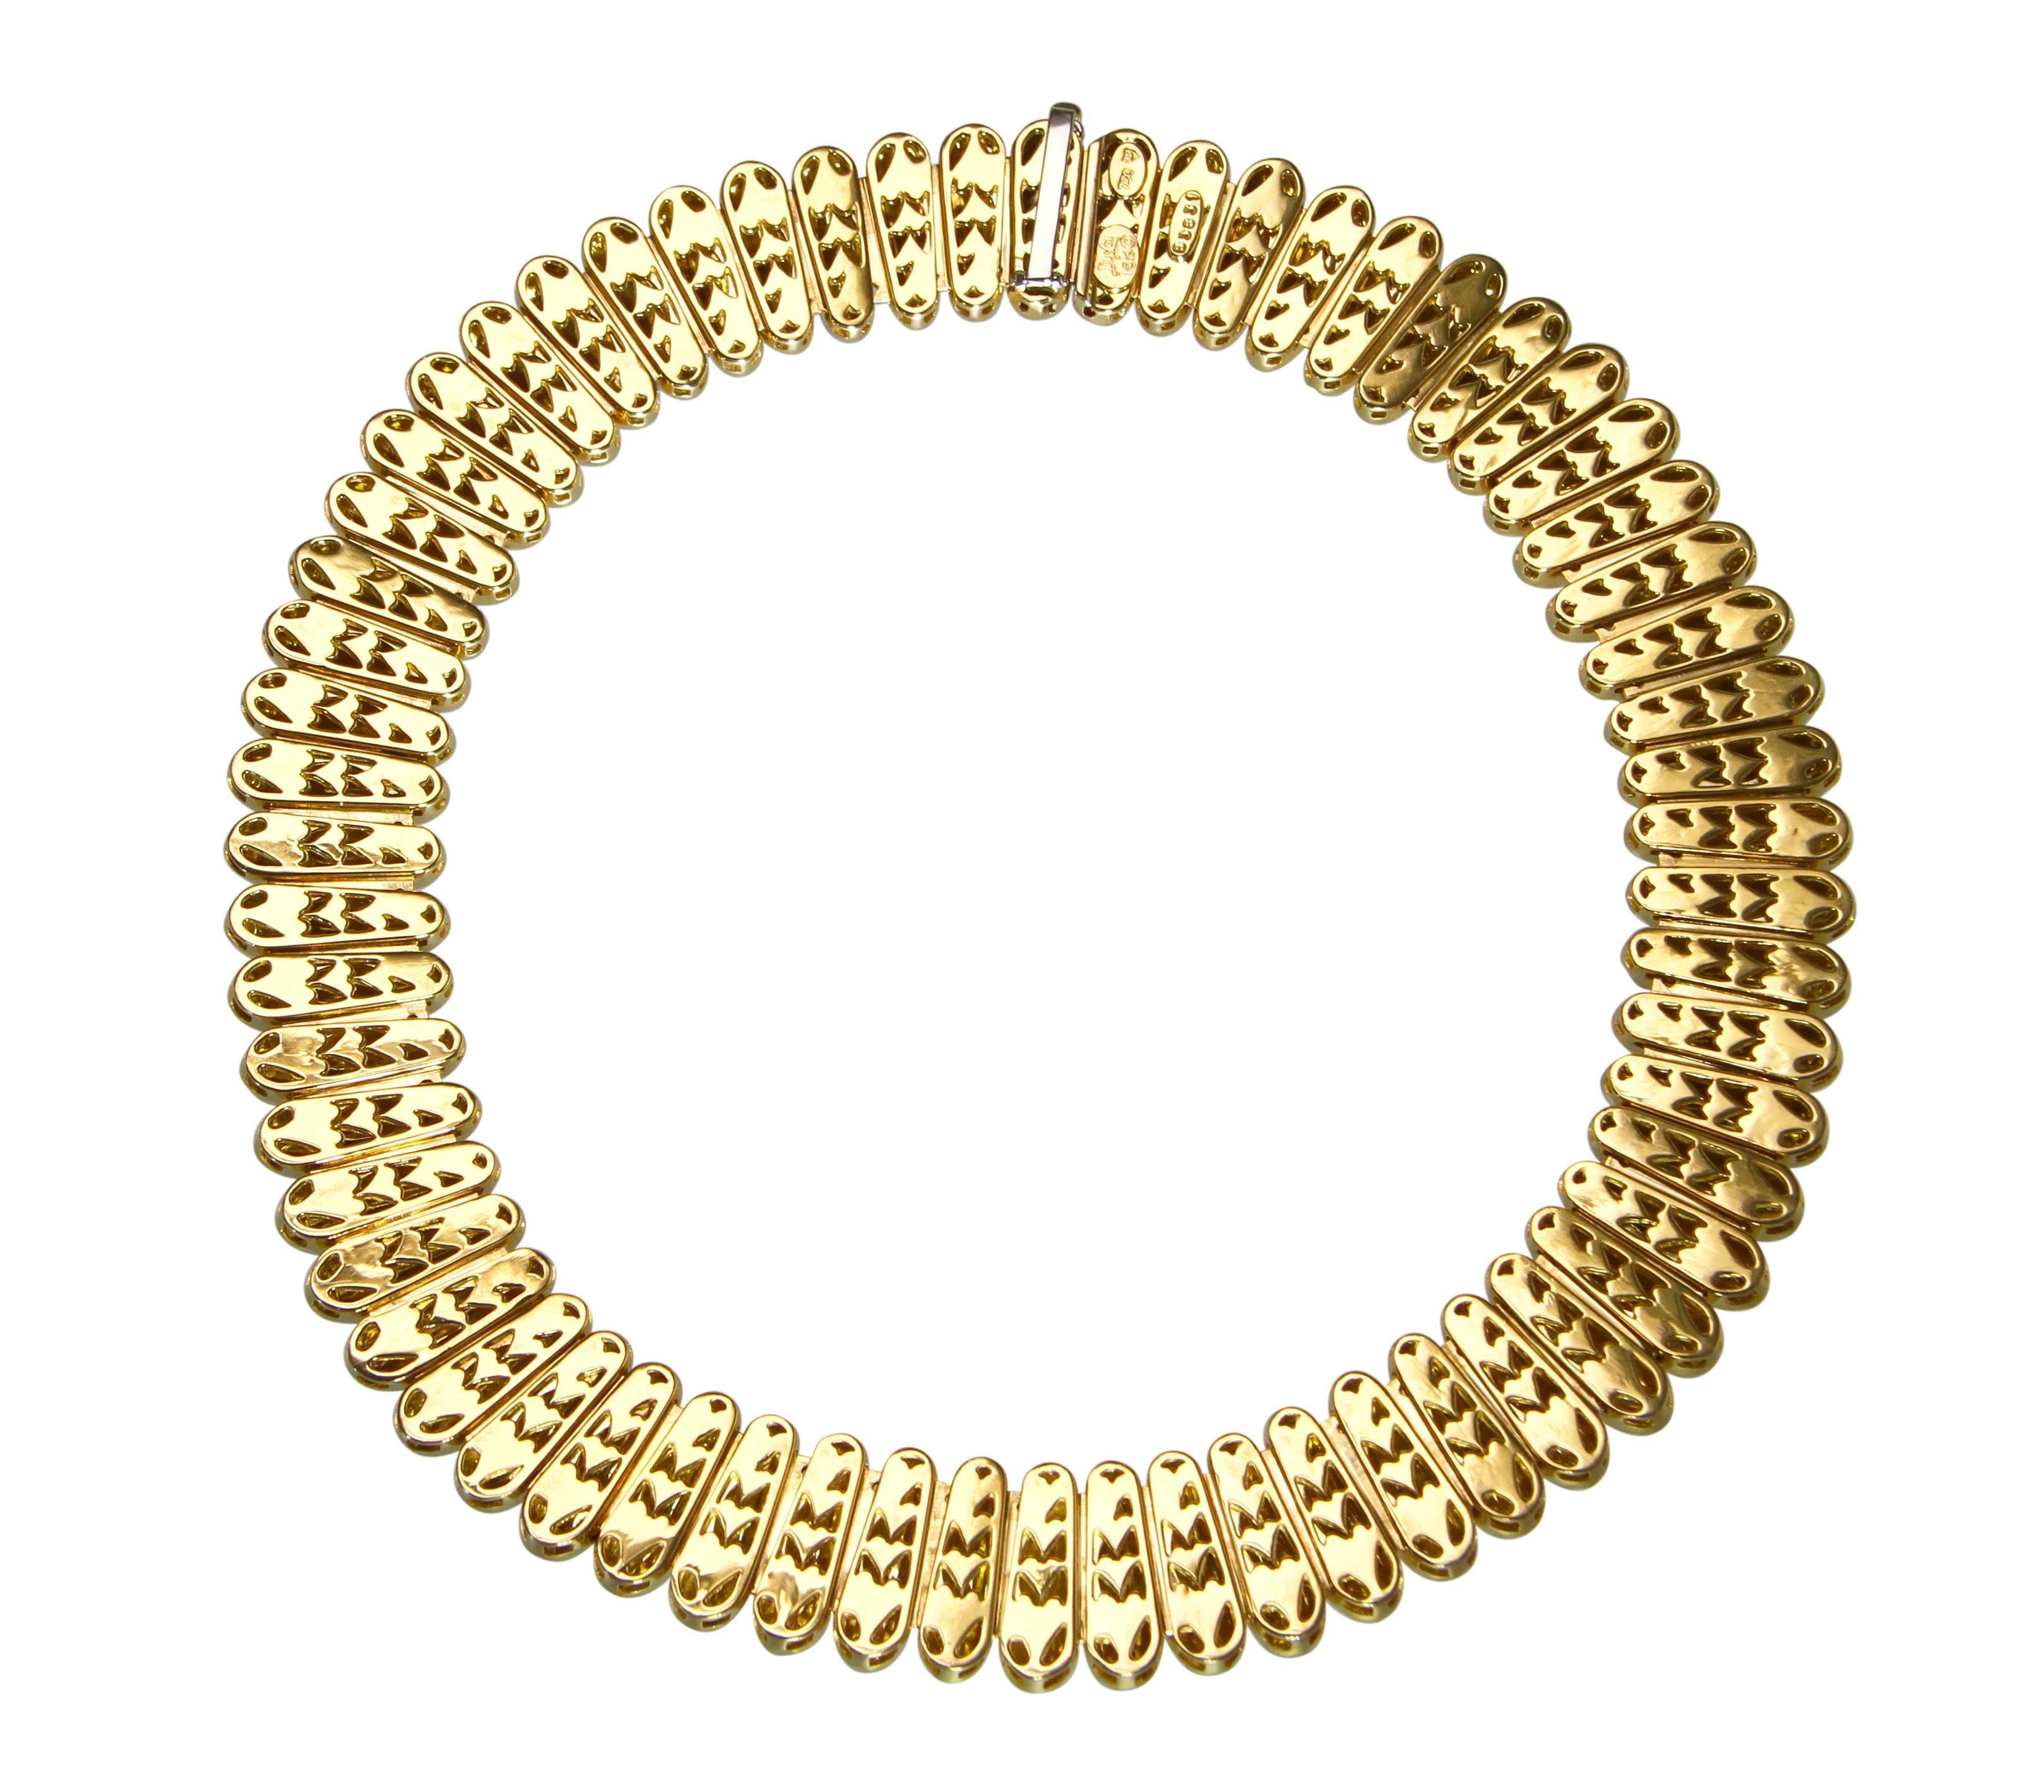 An 18 karat yellow gold necklace by Henry Dunay, comprised of 63 oblong hammered links, length 15 1/2 inches, width 3/4 inch, gross weight of 228.5 grams, signed Henry Dunay, stamped 18k 750, numbered B3831.